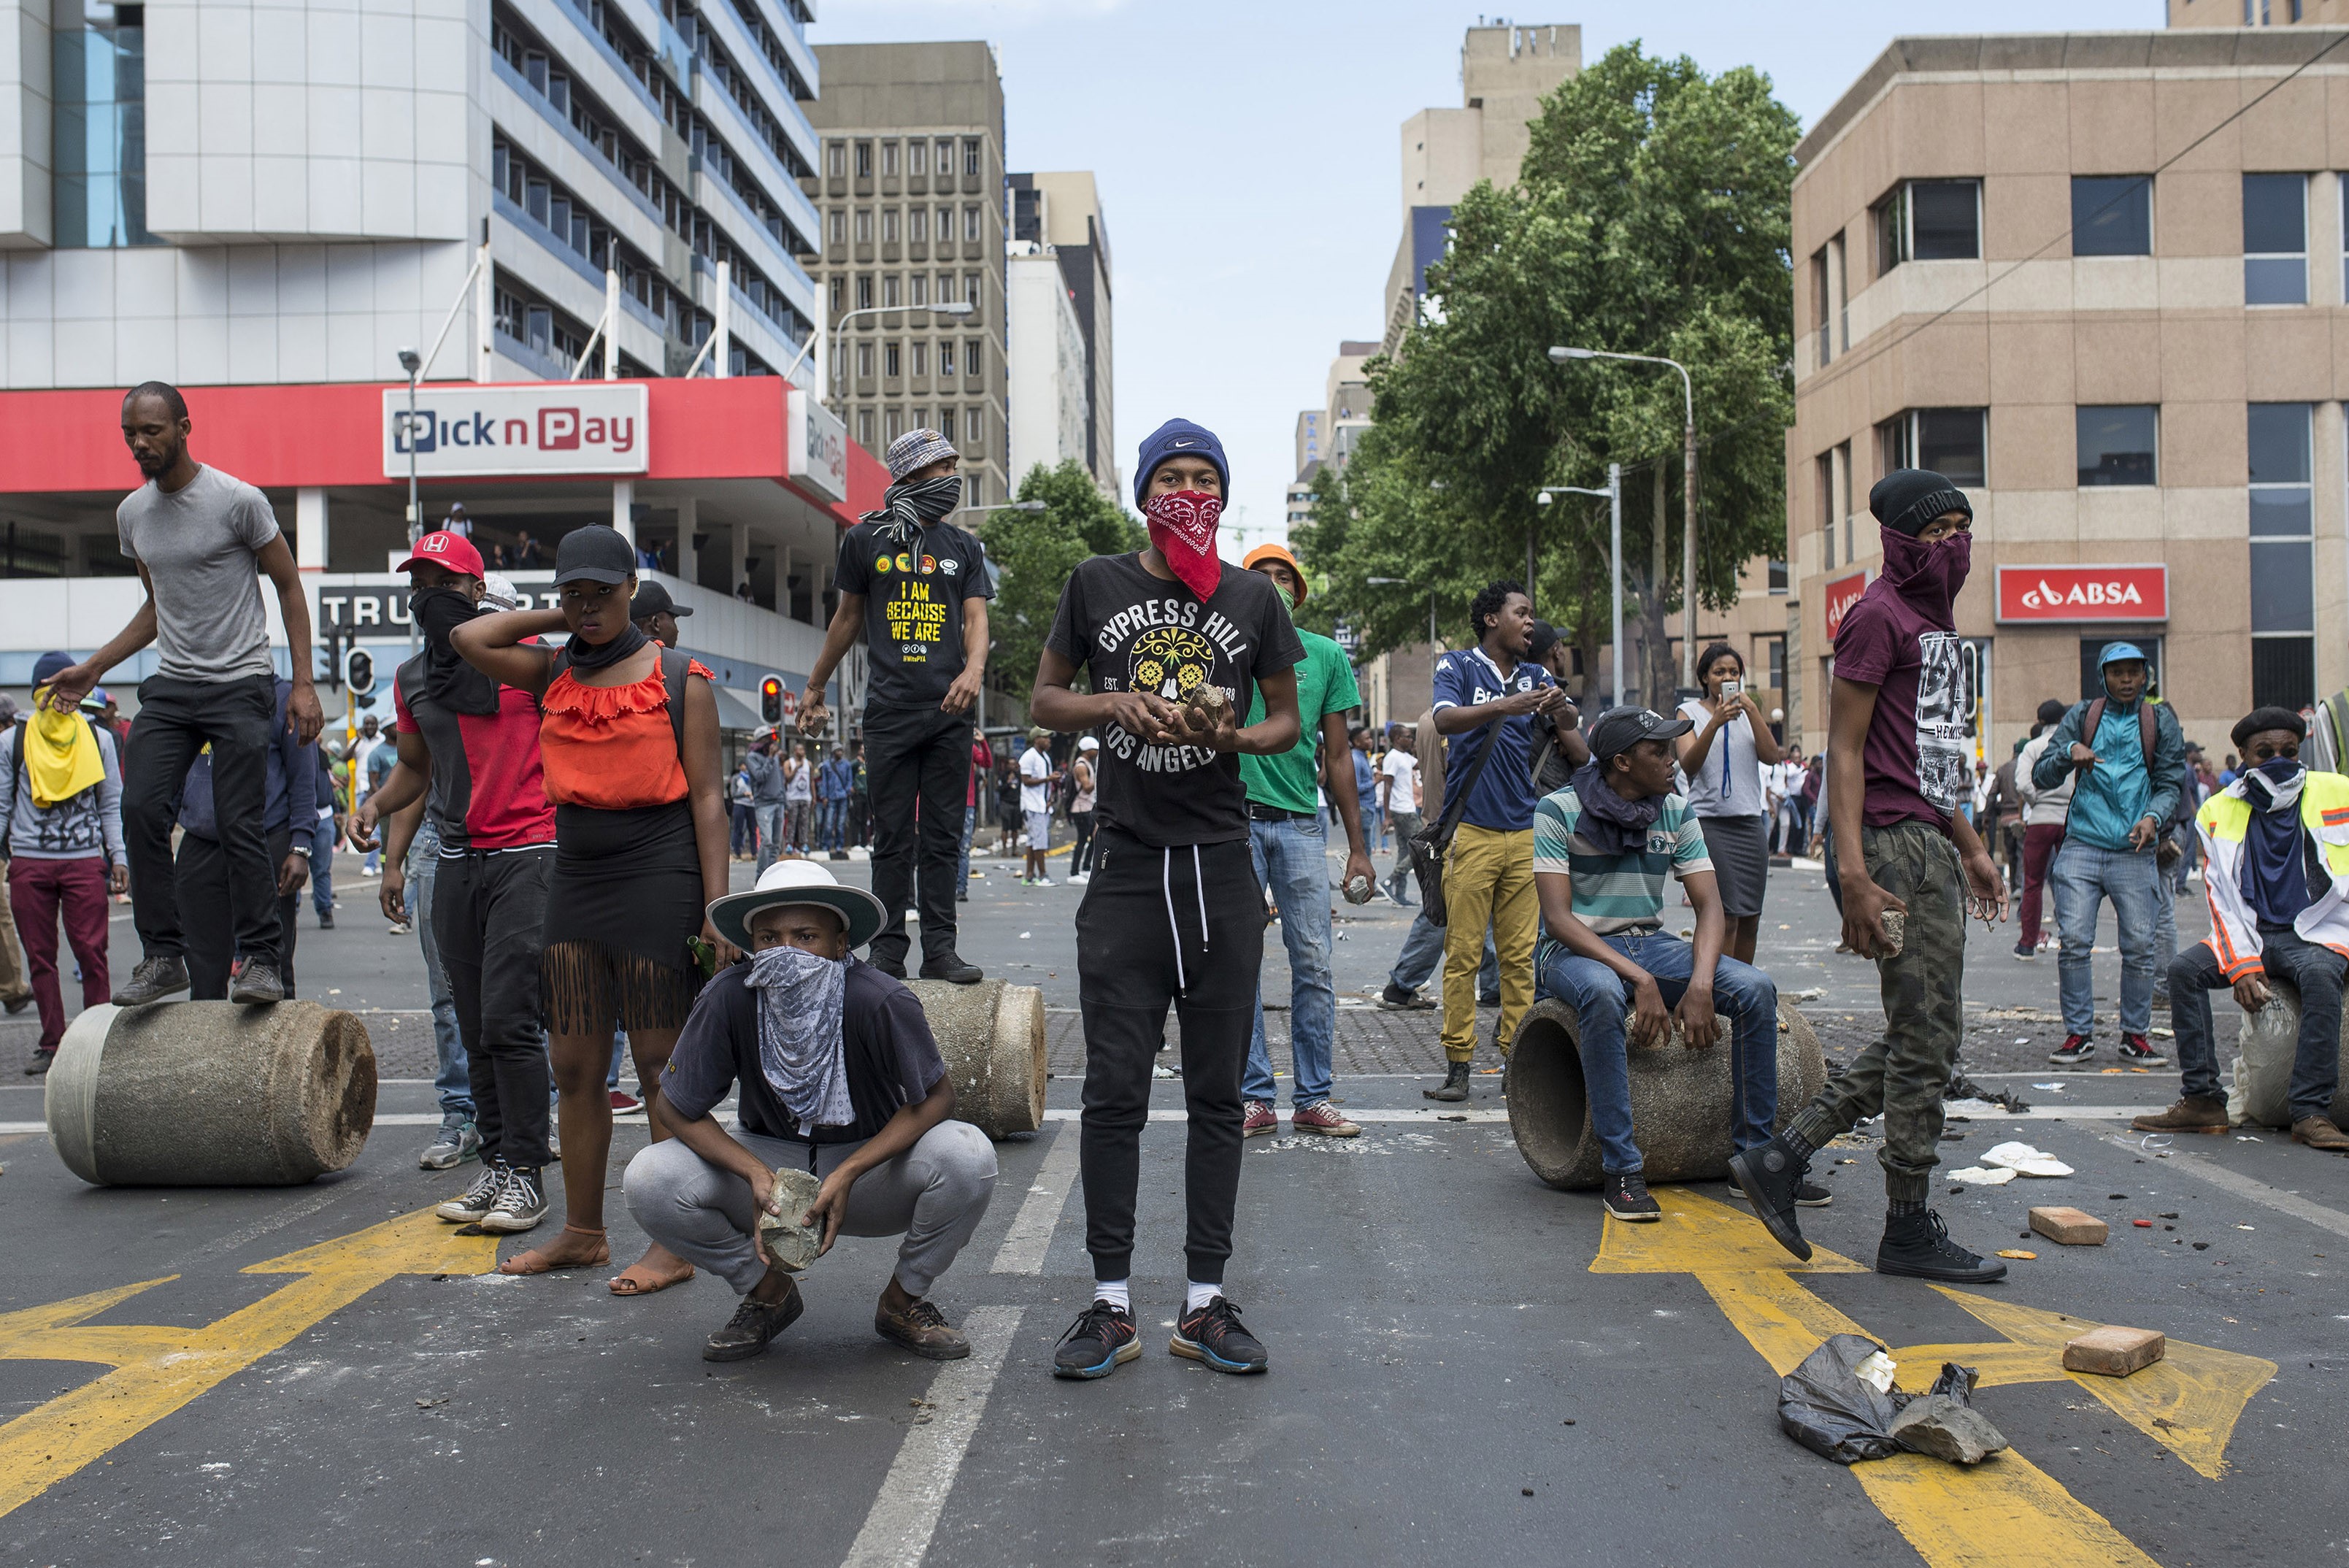 A group of students take cover as the clashes between students and riot police continues during a protest over government's plan of increasing university tuition fees on Oct. 10, 2016 in Witwatersrand University, Johannesburg. (Anadolu Agency/Getty Images)